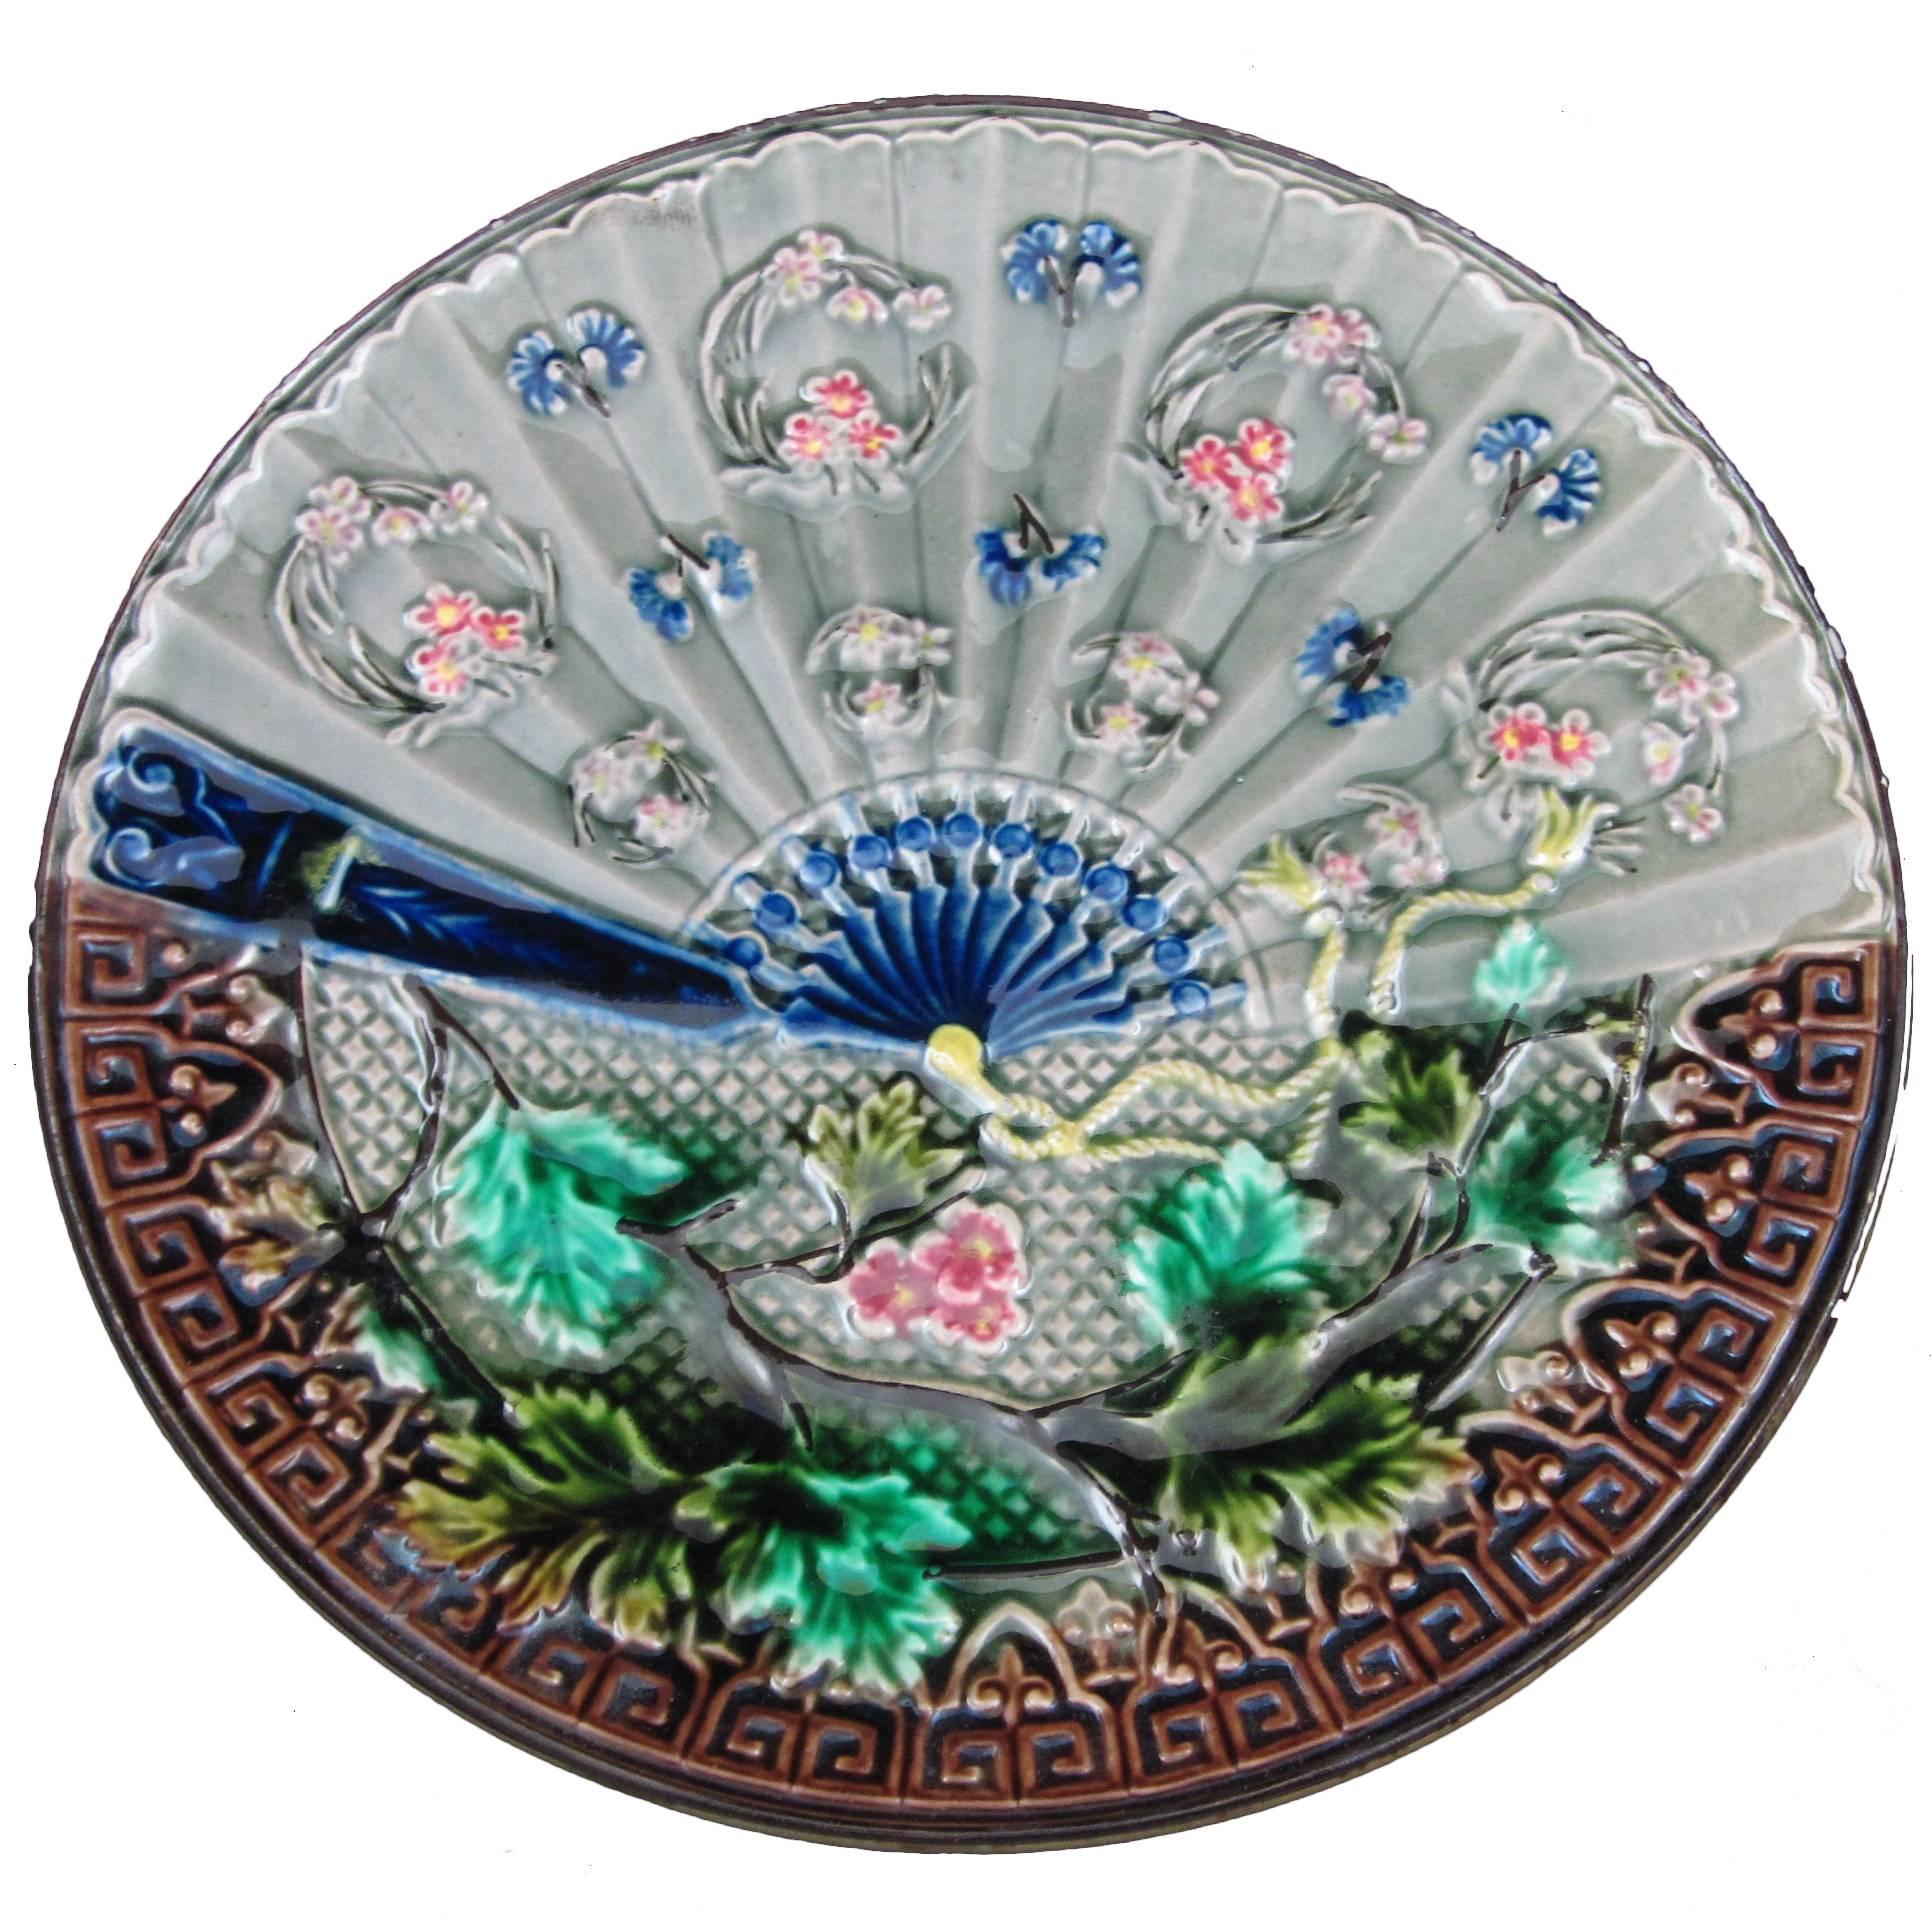 Villeroy & Boch, Japonisme Majolica Fan and Floral Wall-Cabinet Plate